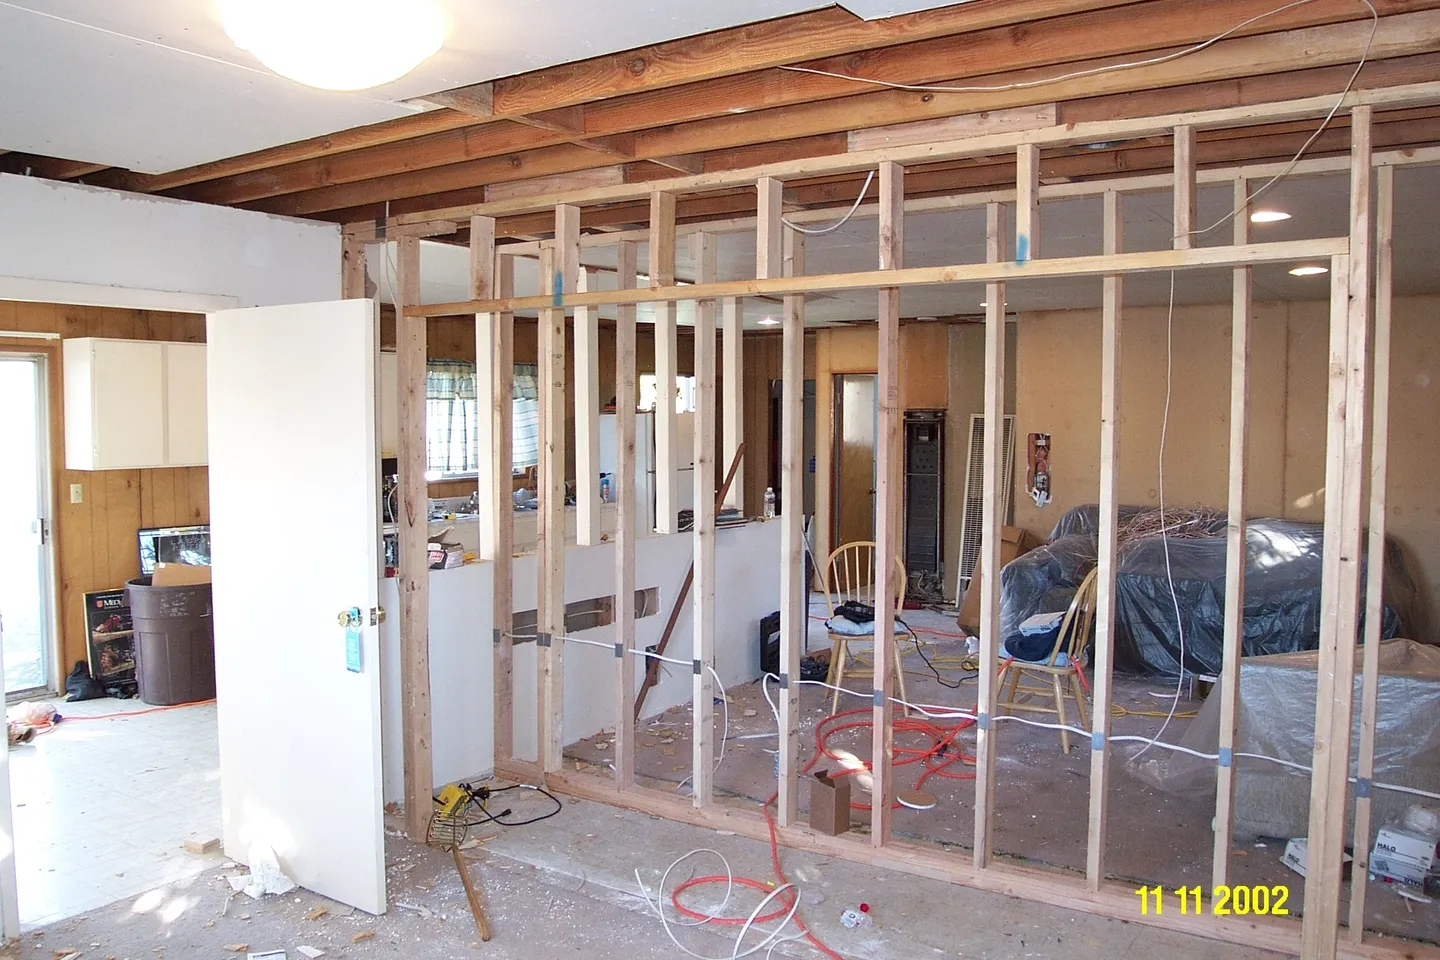 A room being remodeled with some wood framing.